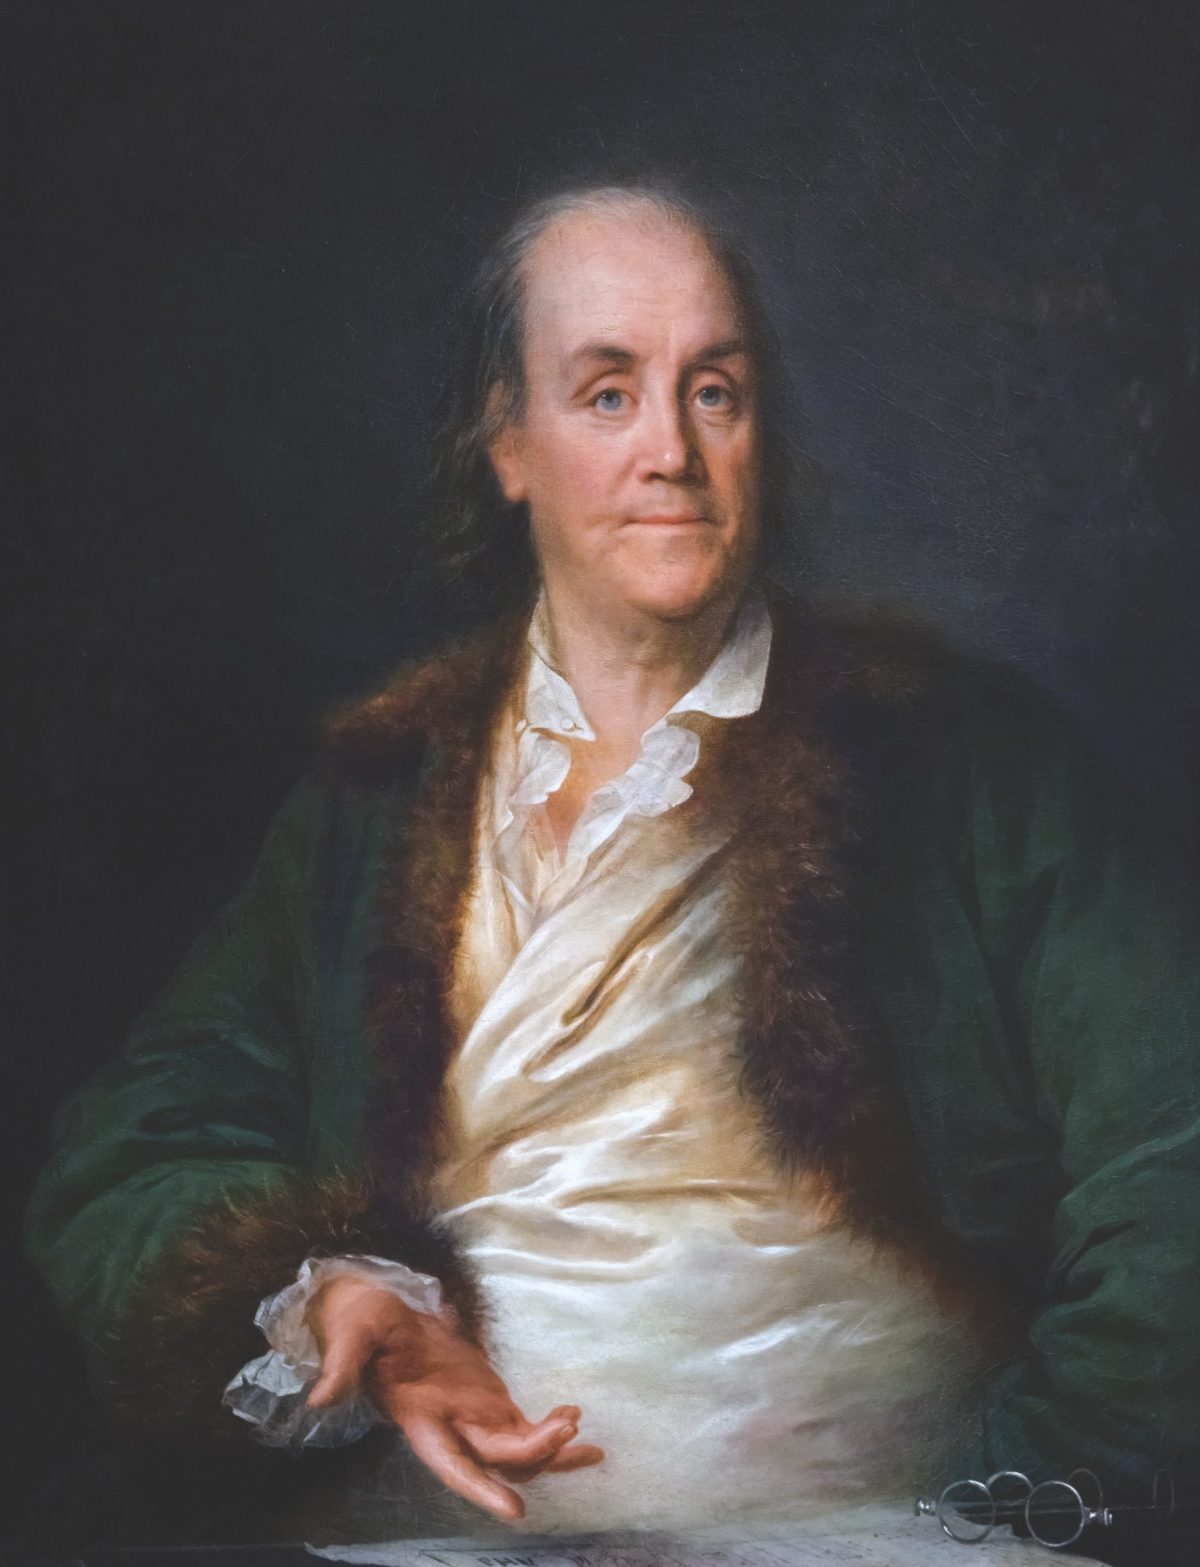 filthy historical facts for dirty minds - benjamin franklin - So